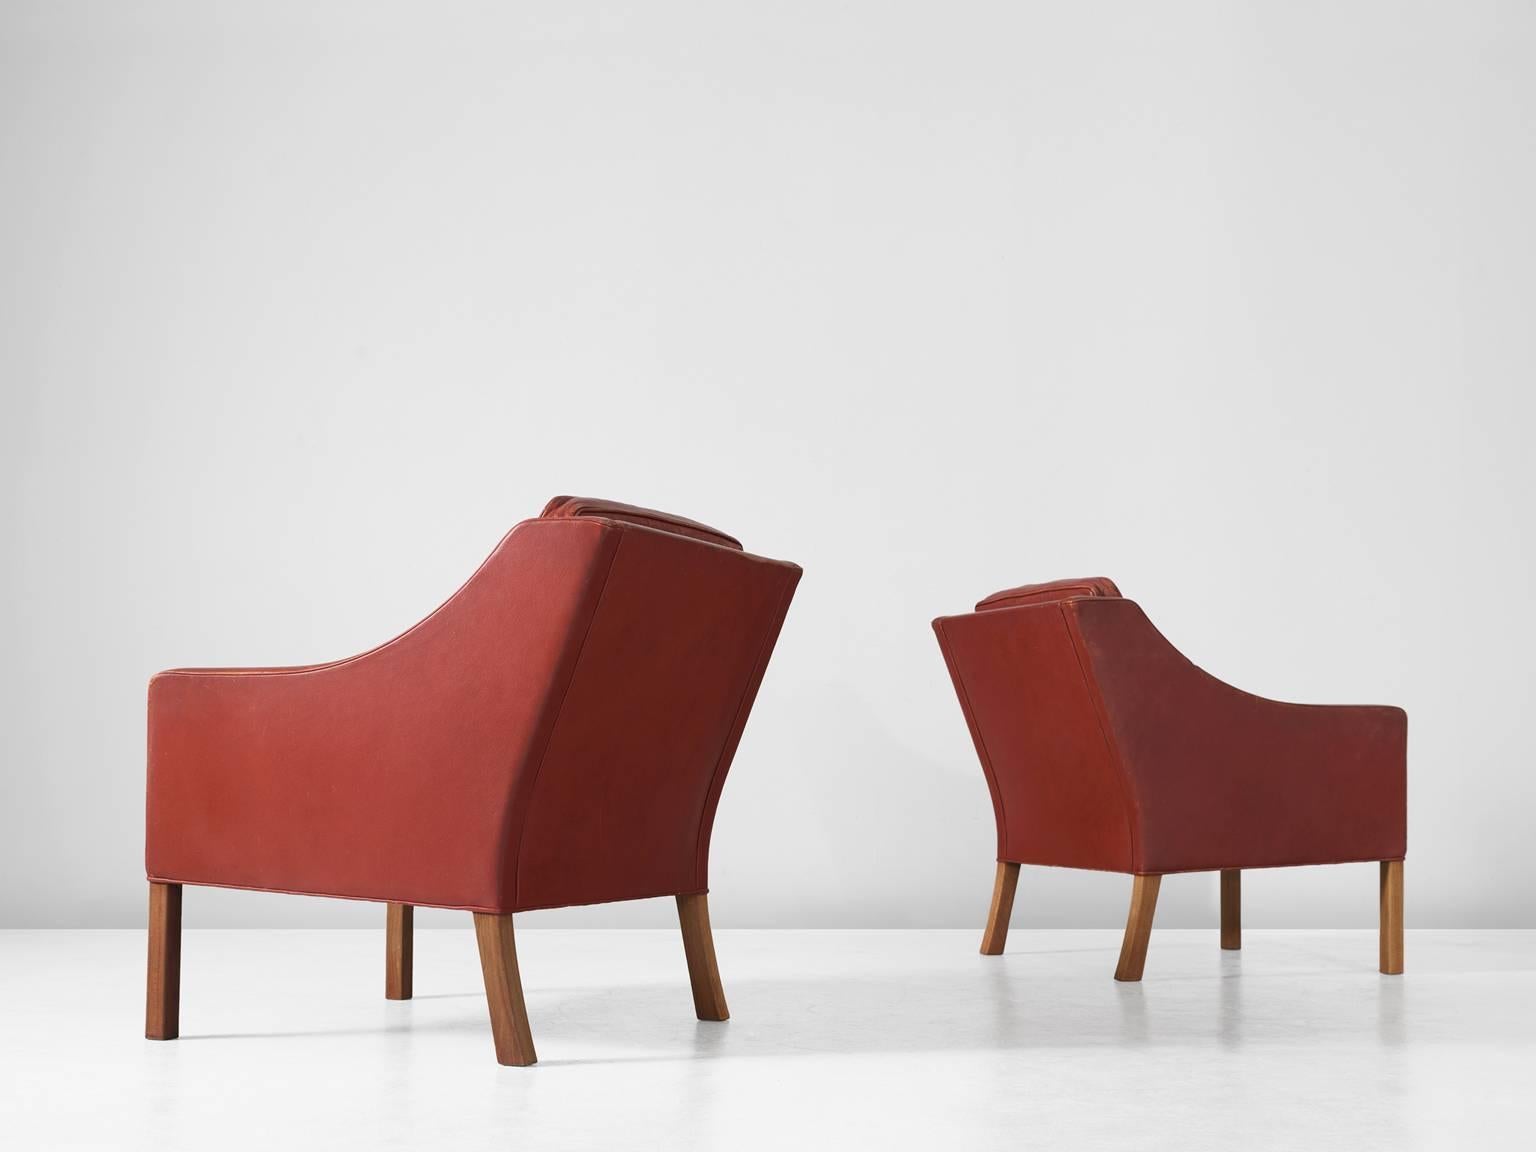 Pair of armchairs model 2207, in leather and wood, by Børge Mogensen for Fredericia Stolefabrik, Denmark, 1963. 

Lounge chairs with an elegant design by Børge Mogensen. These armchairs have a low, curved back, which smoothly runs over into the